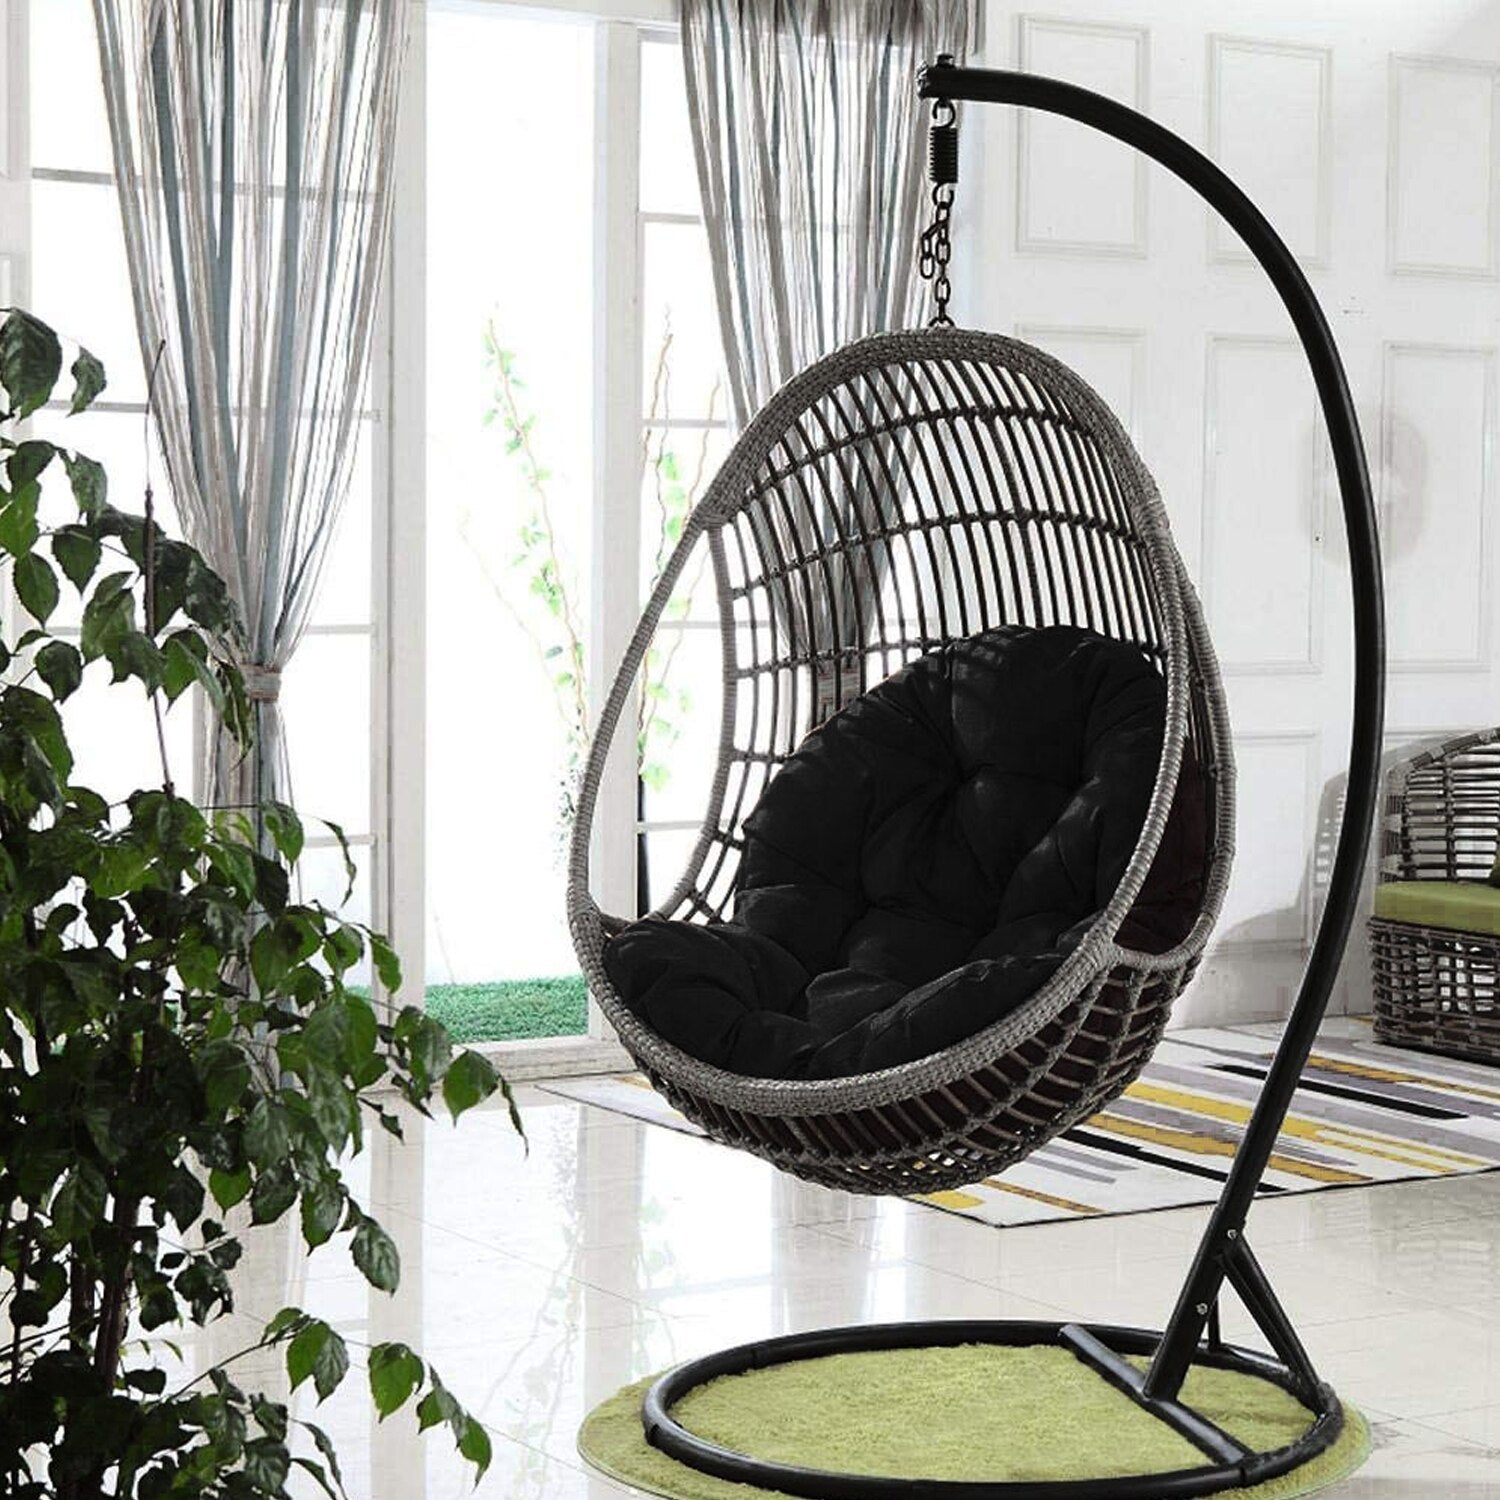 Swing Hanging Swing Basket Seat Cushion Thickened Balcony Egg Hammock Rocking Chair Seat Pads for Home Patio Garden Living Rooms